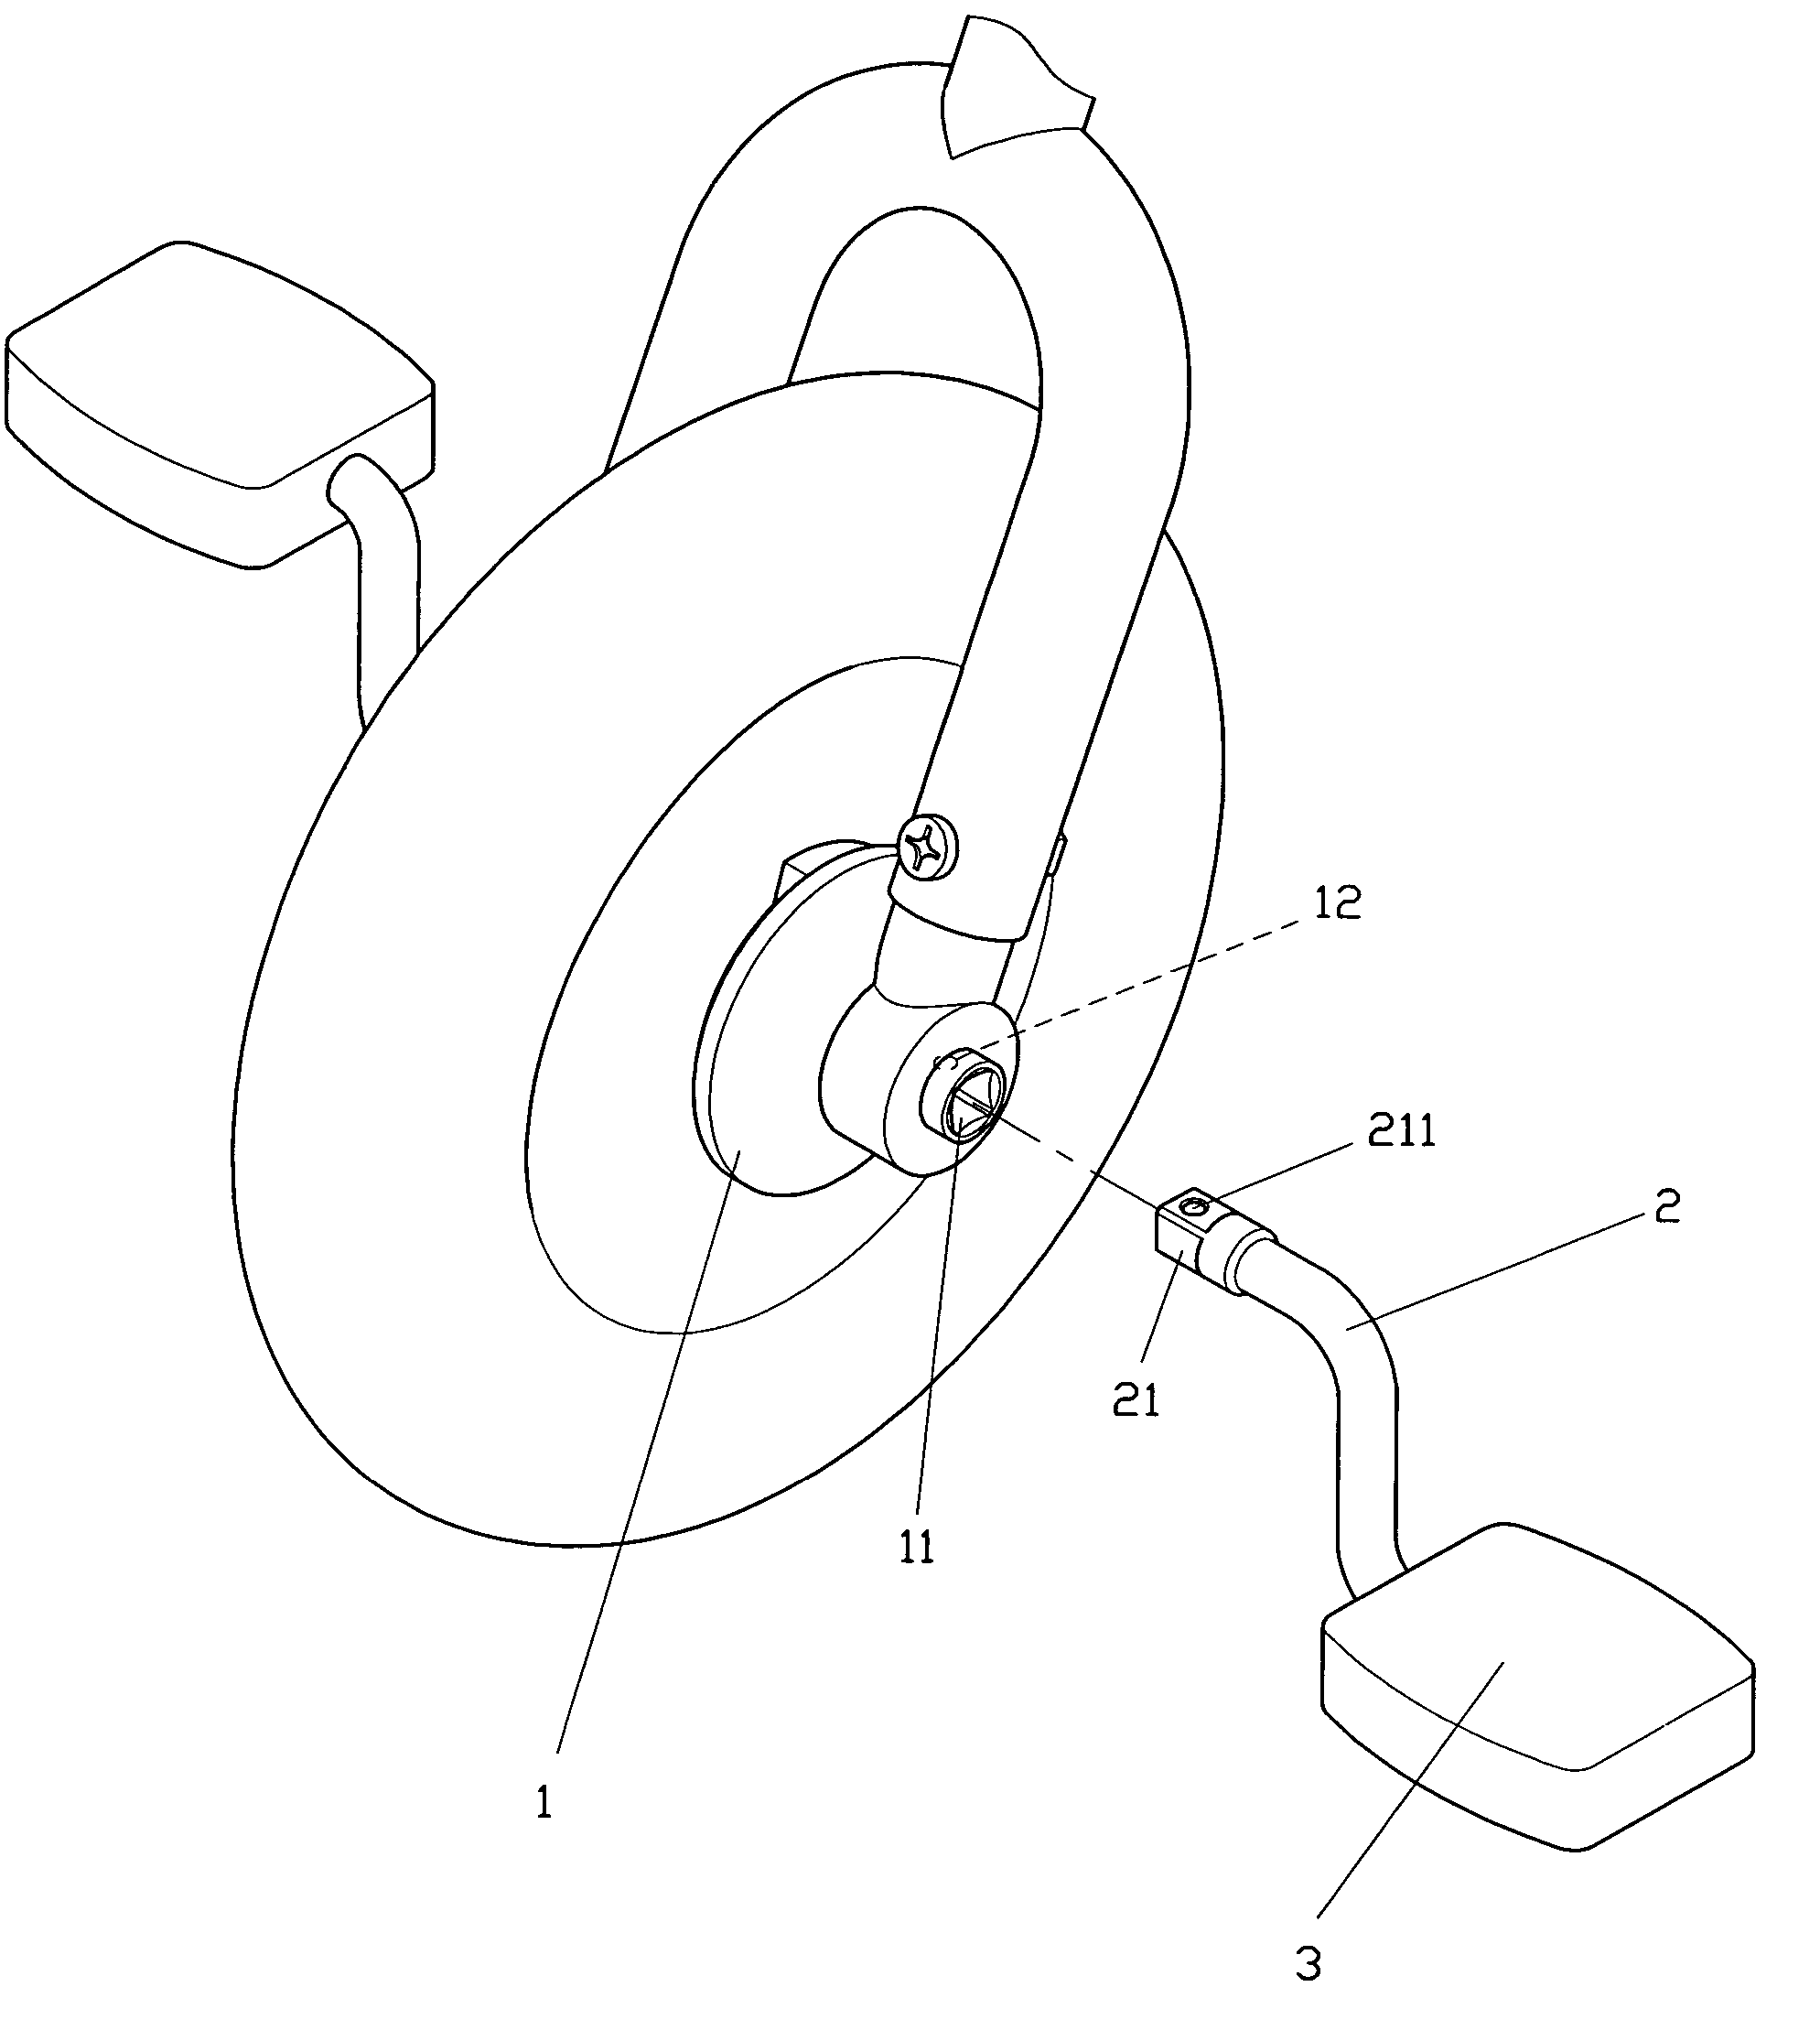 Tricycle crank structure